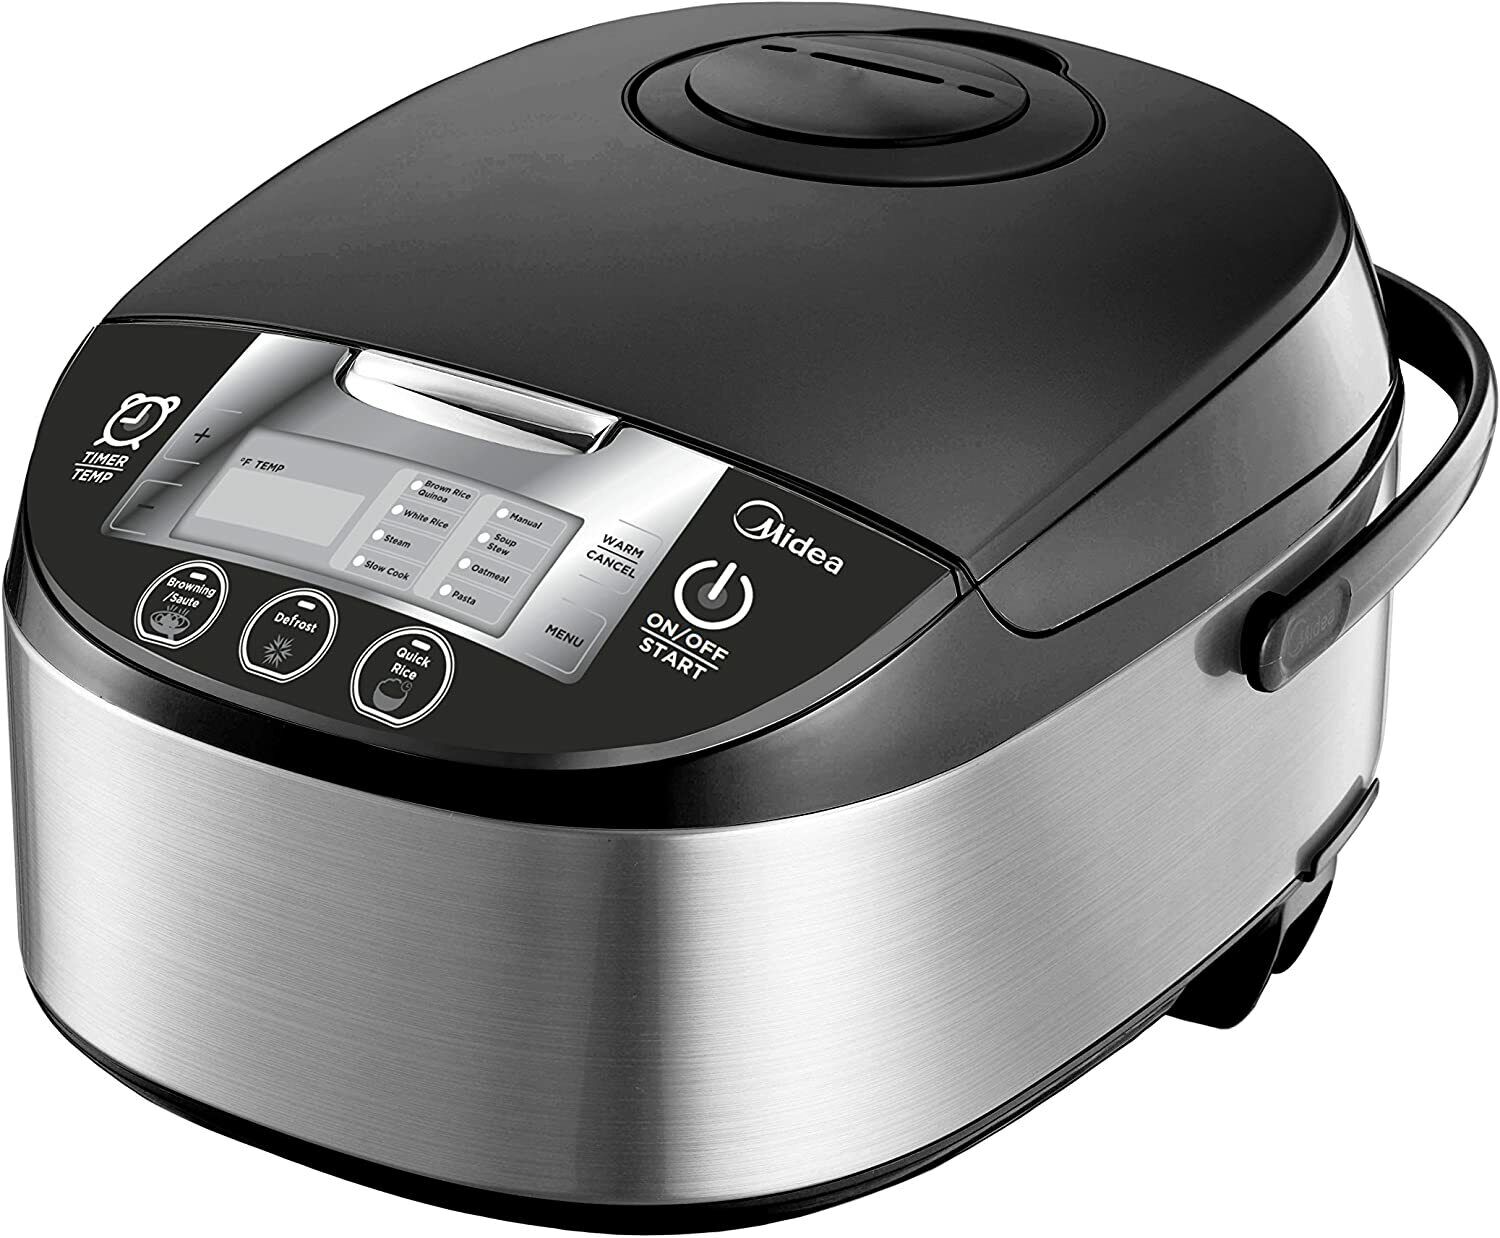 MIDEA 8-IN 1 TASTEMAKER RICE COOKER/MULTI-FUNCTIONAL COOKER STAINLESS STEEL WITH